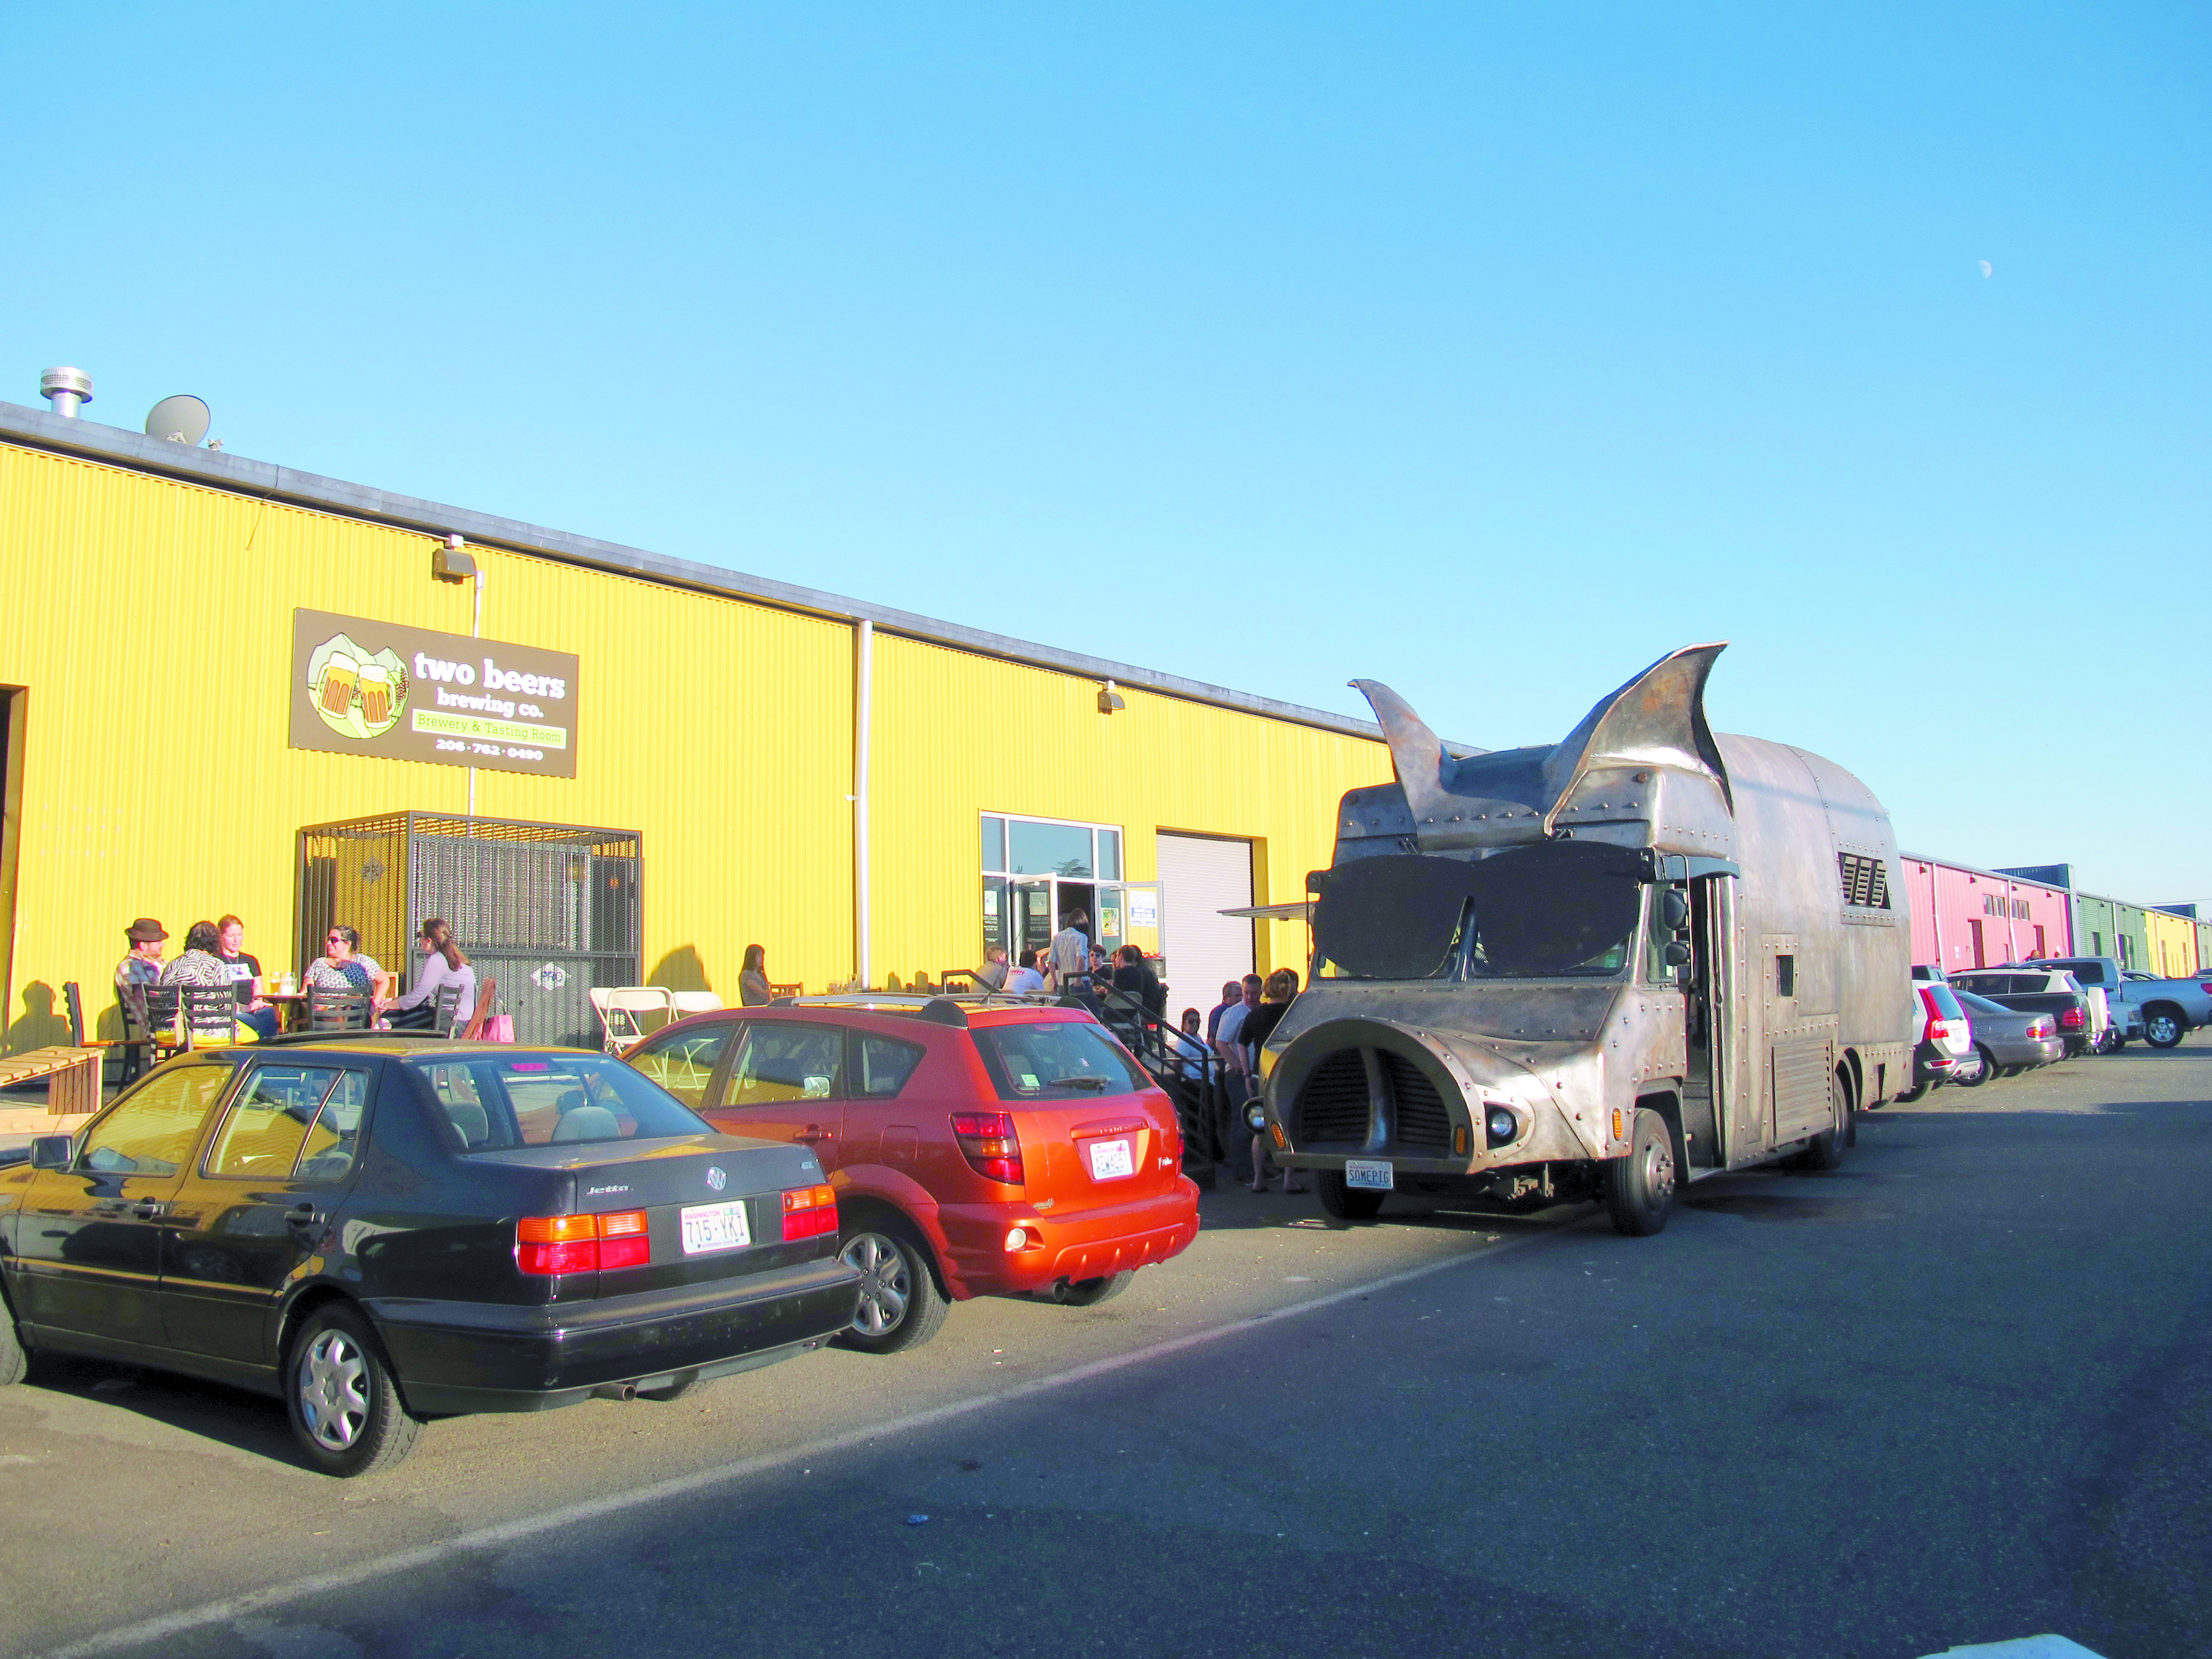 Food Truck Friday at Two Beers Brewing.